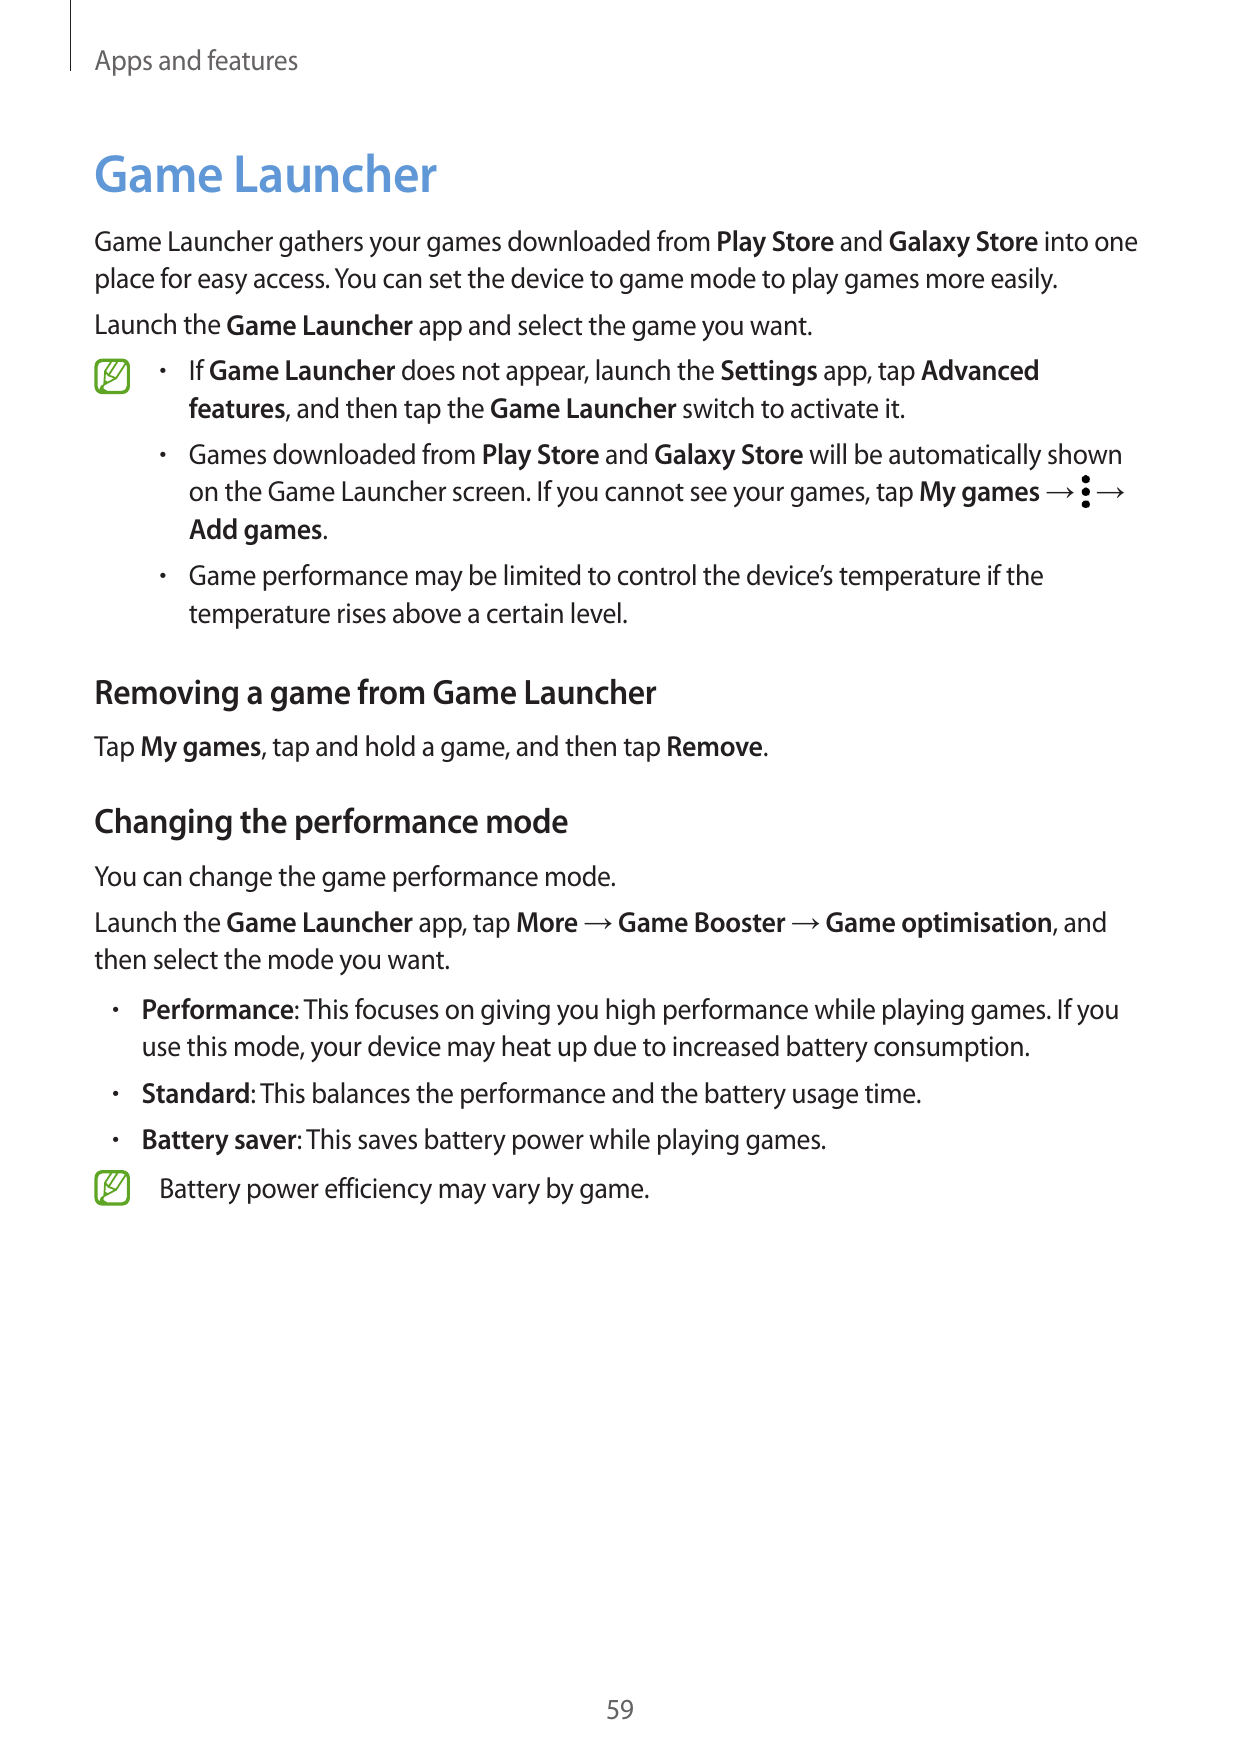 Apps and featuresGame LauncherGame Launcher gathers your games downloaded from Play Store and Galaxy Store into oneplace for eas